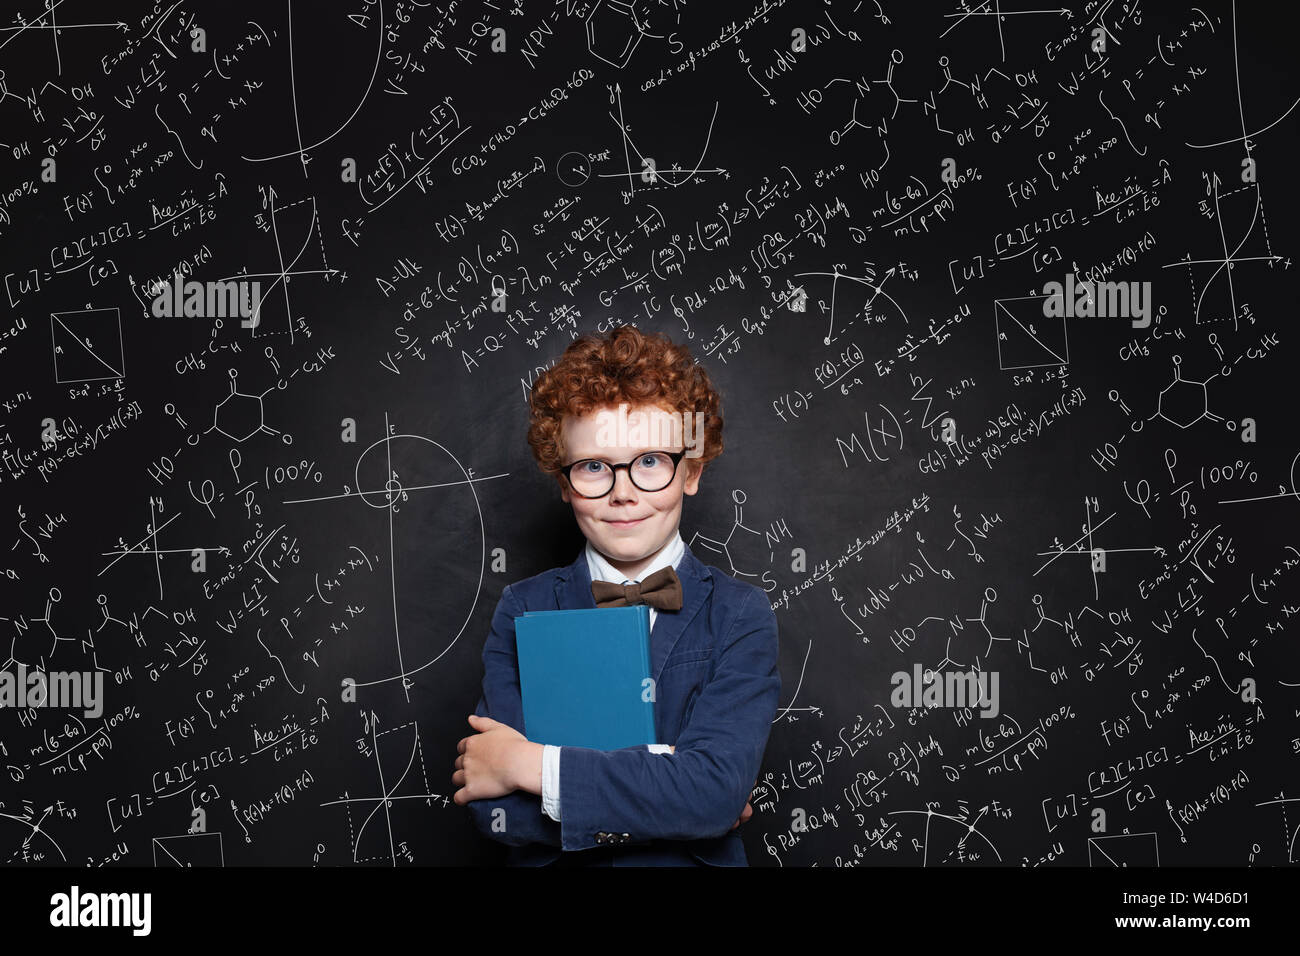 Happy child pupil against science background Stock Photo